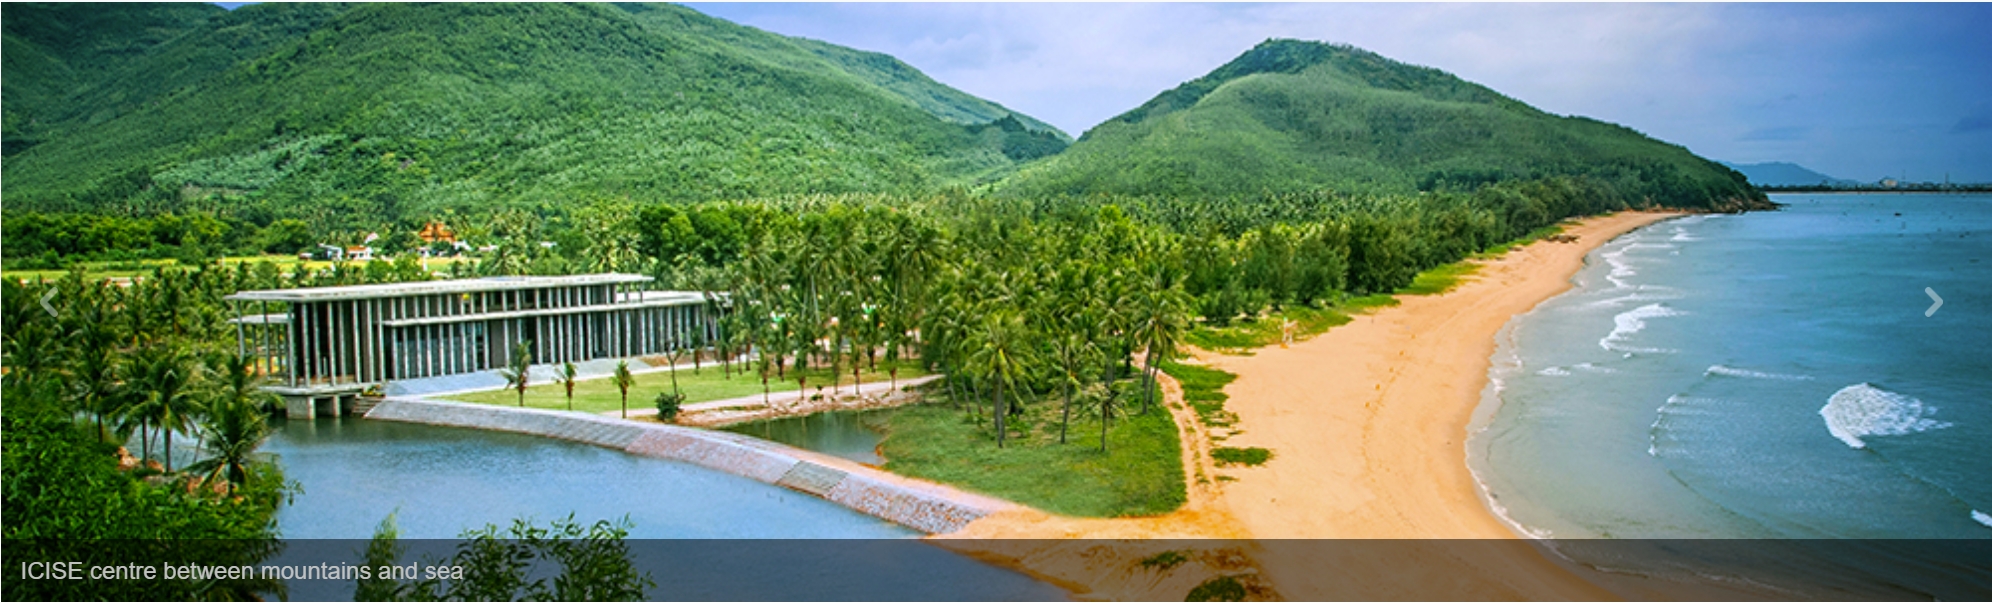 【Internship Site Introduction】Ministry of Natural Resources and Environment of Vietnam